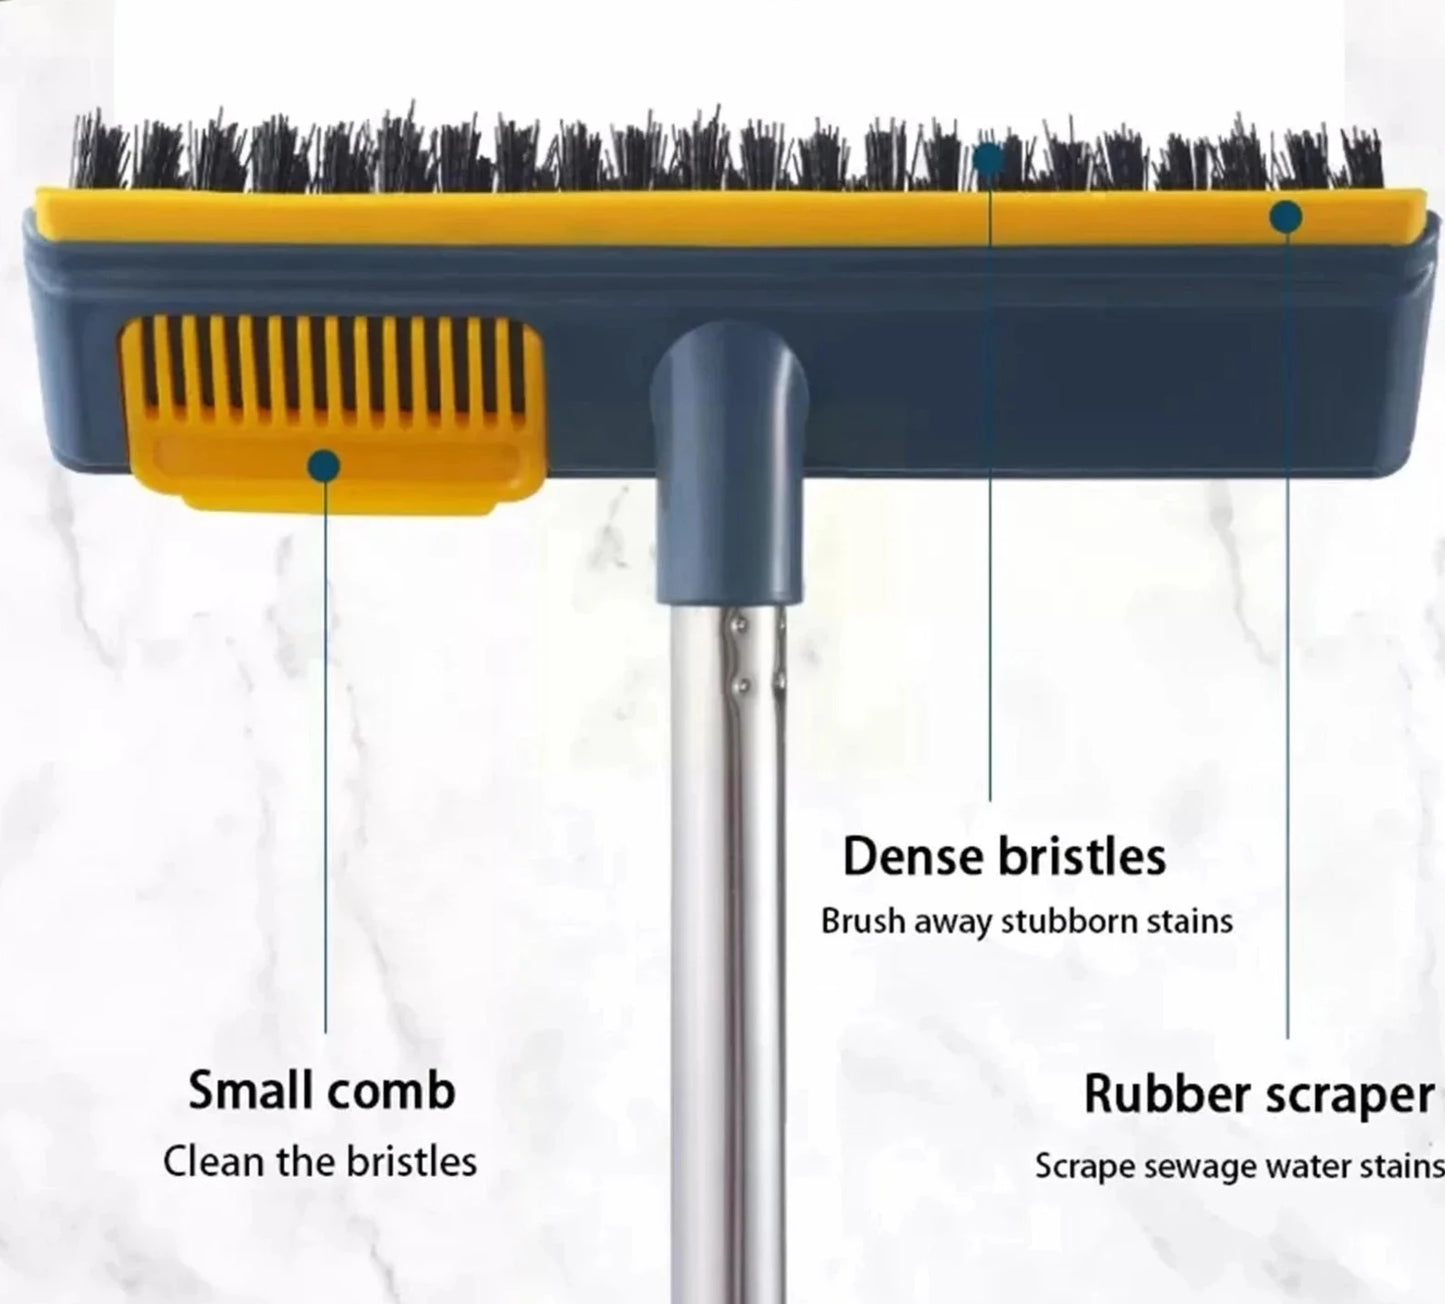 AquaWipe DuoFlex: The Ultimate 2-in-1 Cleaning Tool for Every Surface